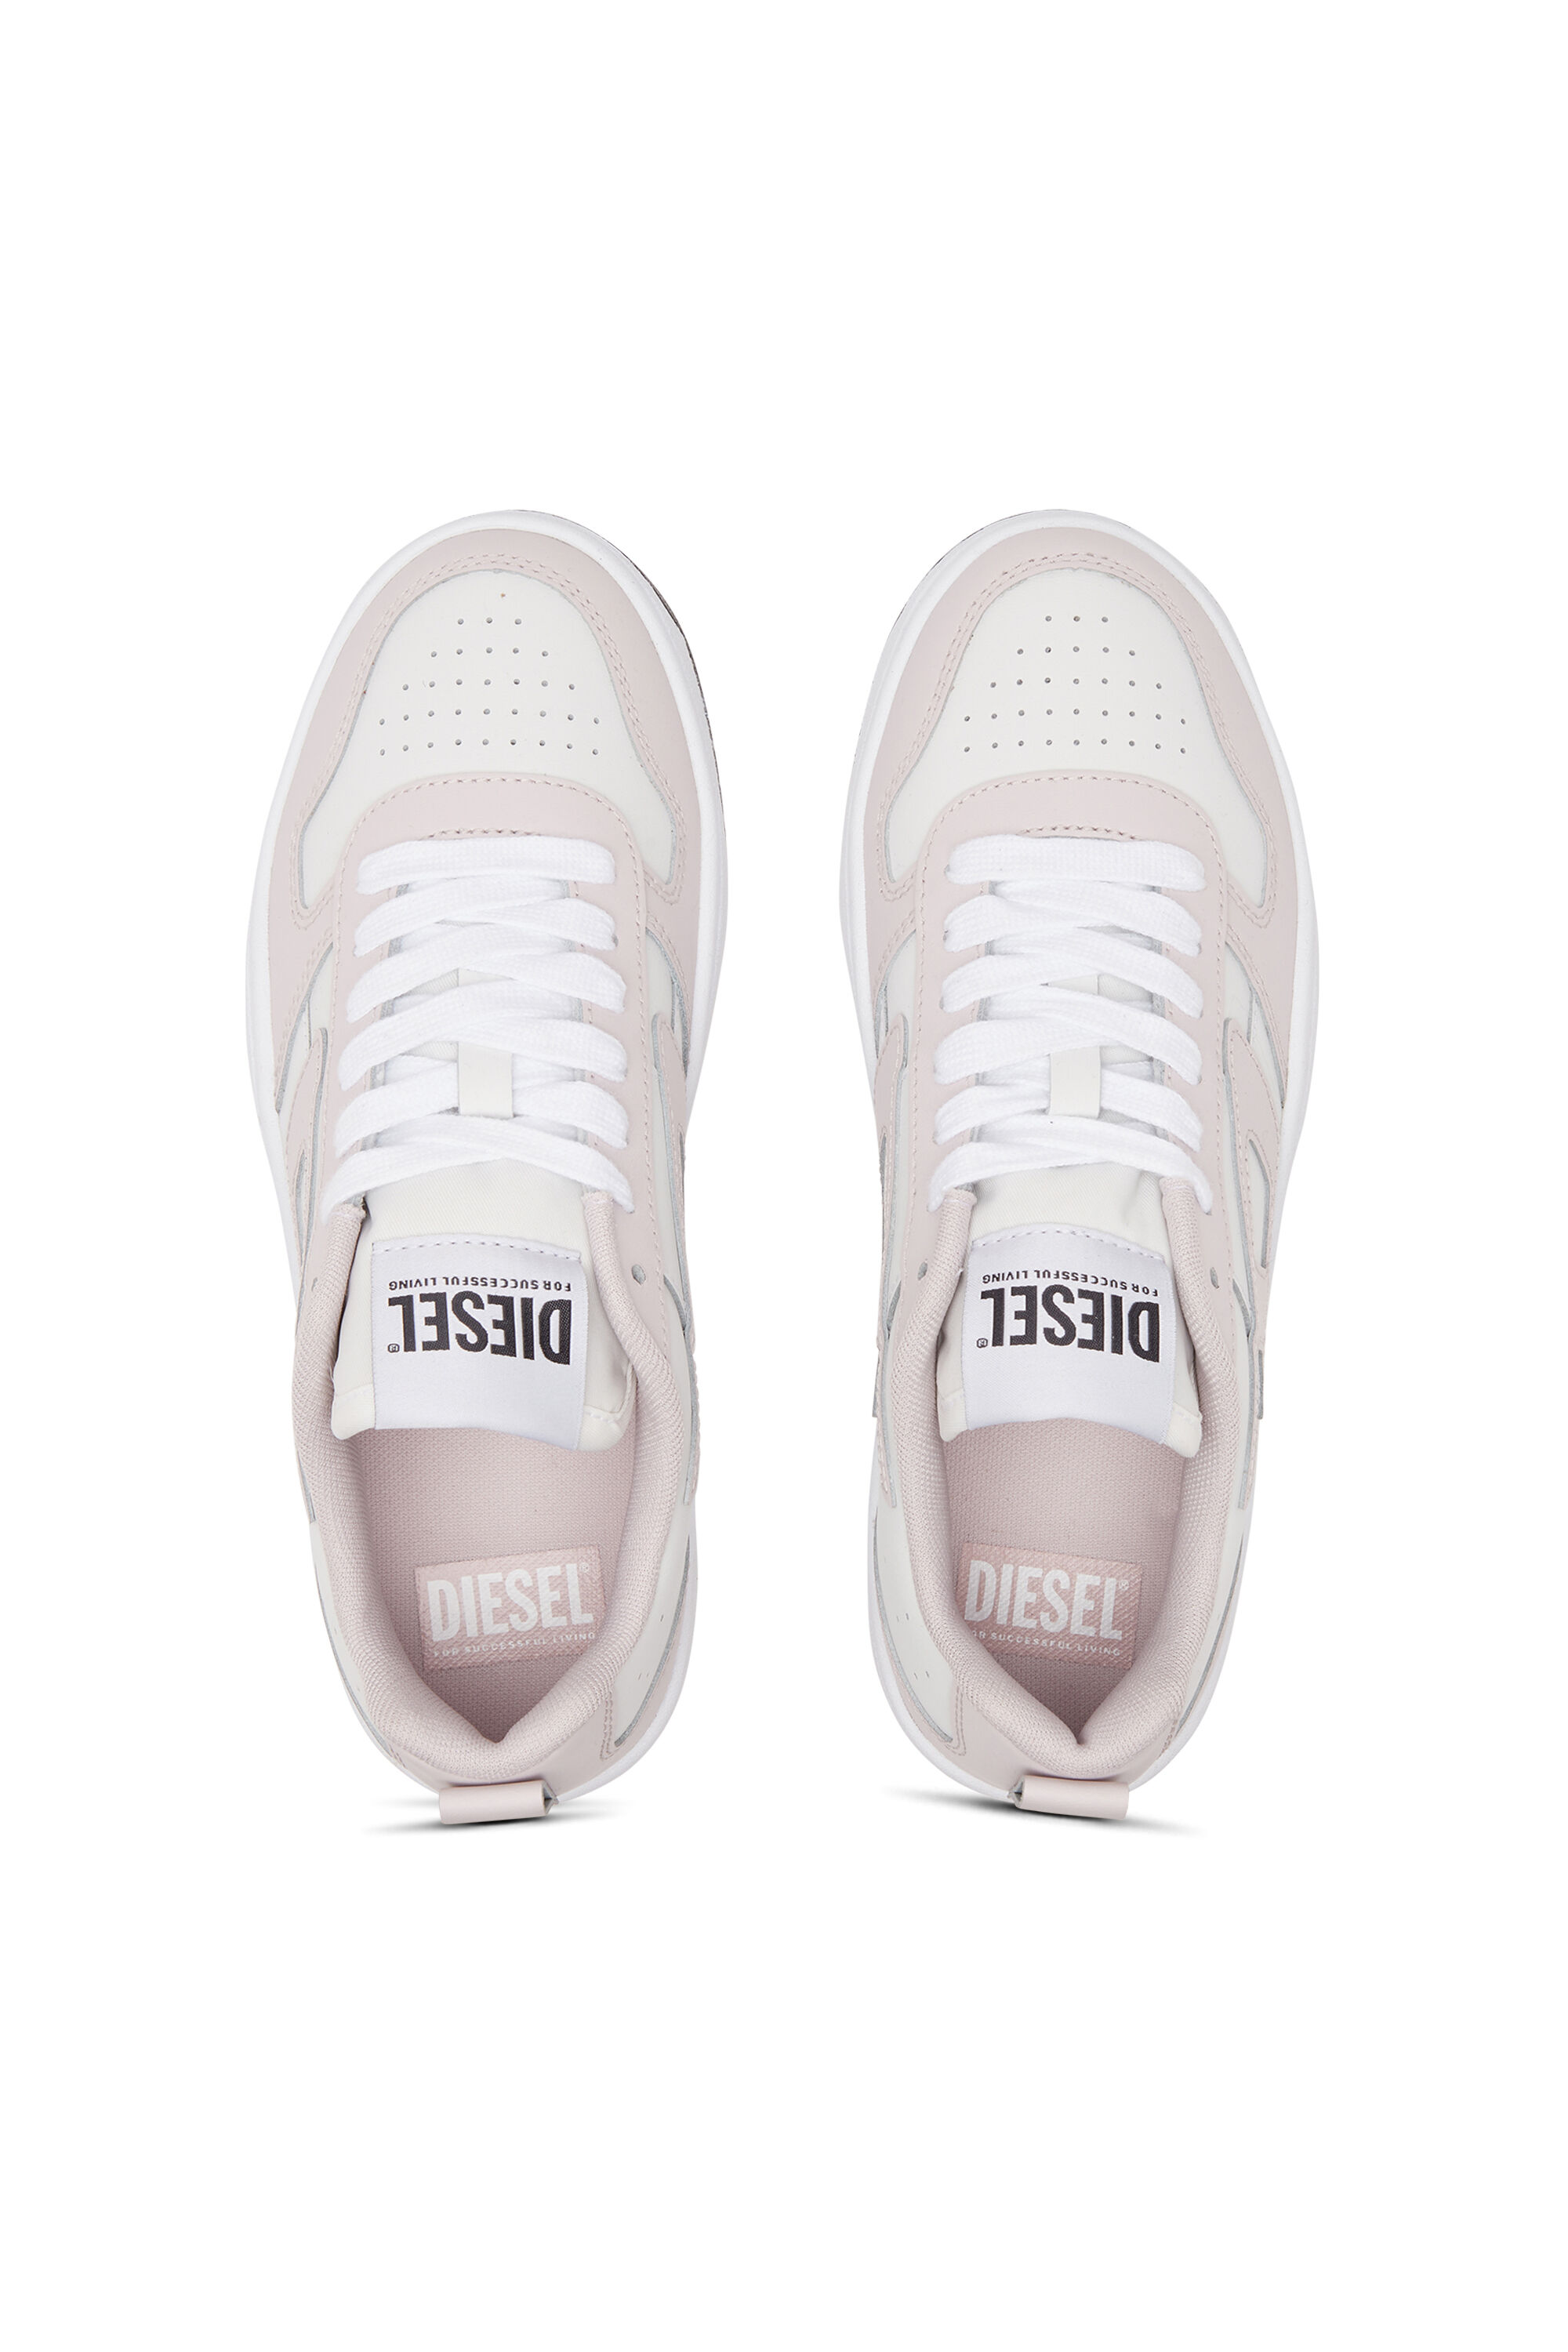 Diesel - S-UKIYO V2 LOW W, Woman S-Ukiyo Low-Low-top sneakers in leather and nylon in Multicolor - Image 4